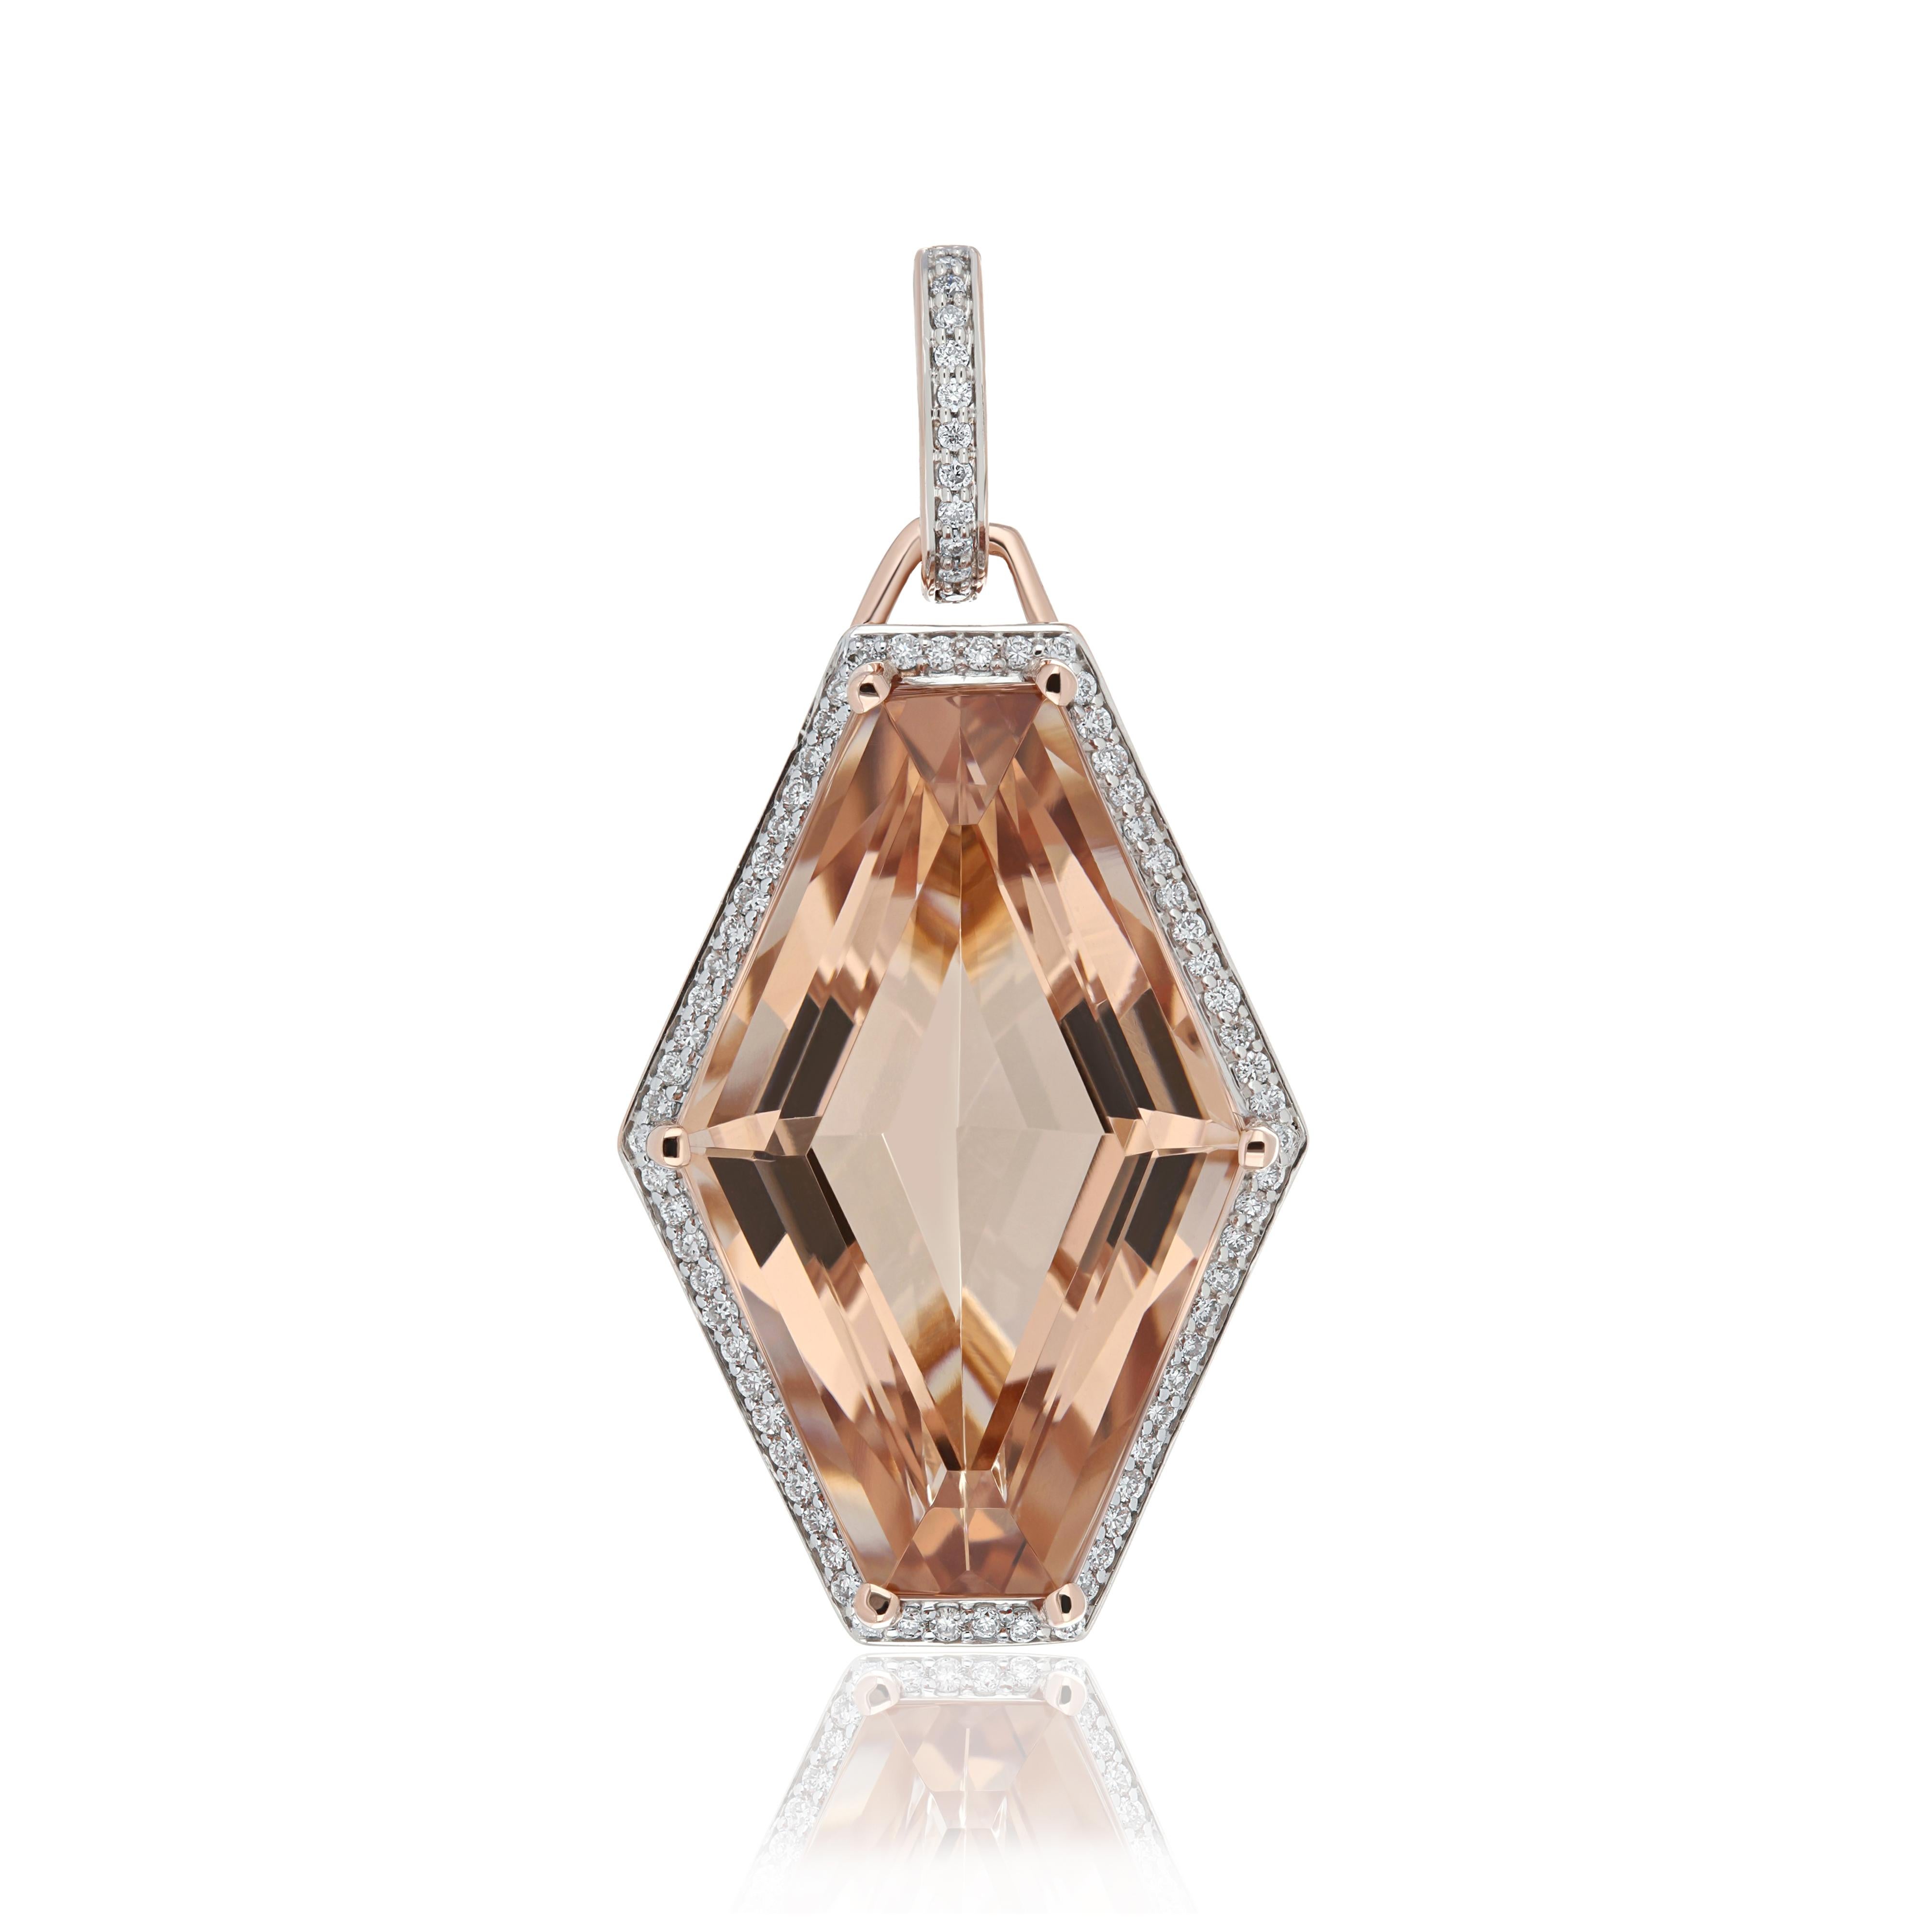 Elegant and exquisitely detailed Cocktail 14K Pendant, center set with 13.5 Cts. (approx) Fancy Hexagon Cut Morganite. Surrounded with Diamonds, weighing approx. 0.19 ct. Beautifully Hand crafted in 14 Karat Rose Gold.

Stone Size:
Morganite: 22 x